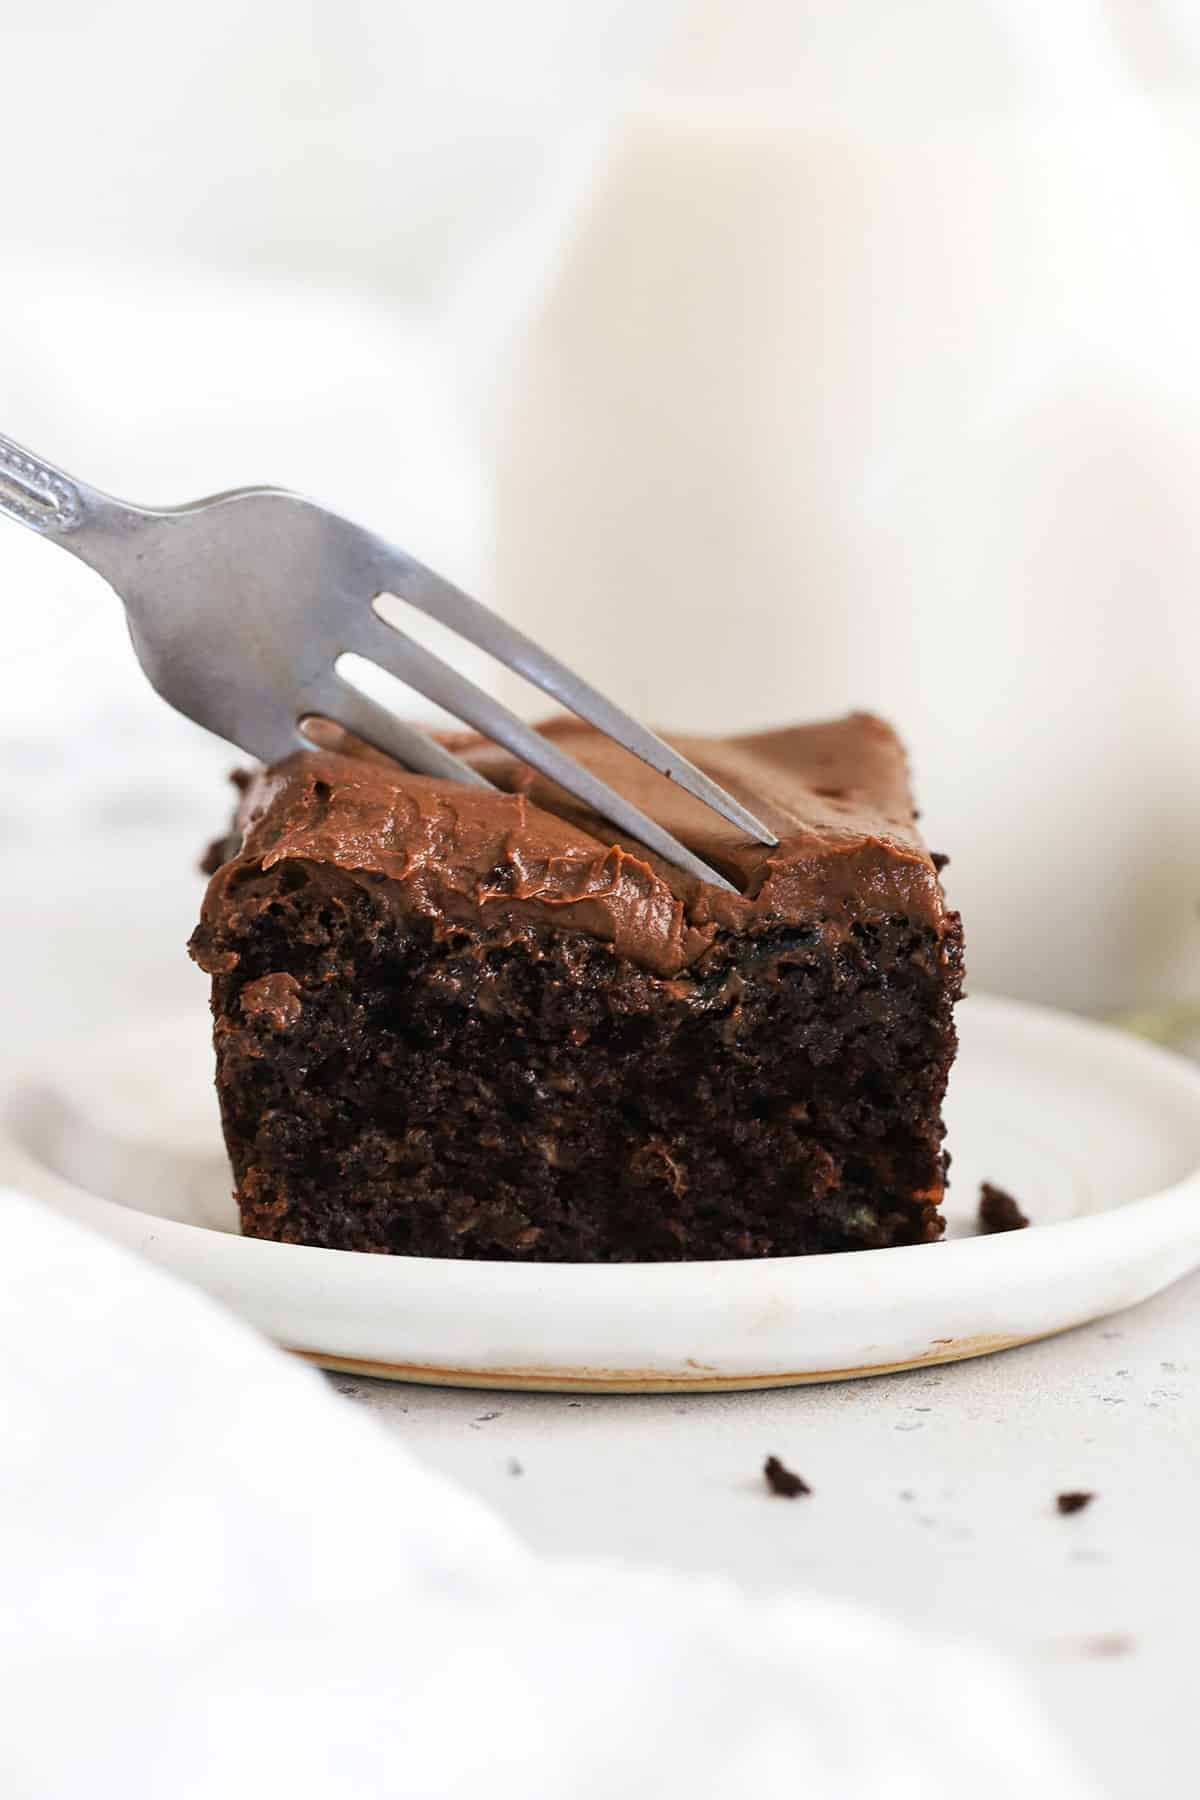 a fork cutting into a slice of gluten-free chocolate zucchini cake with chocolate frosting